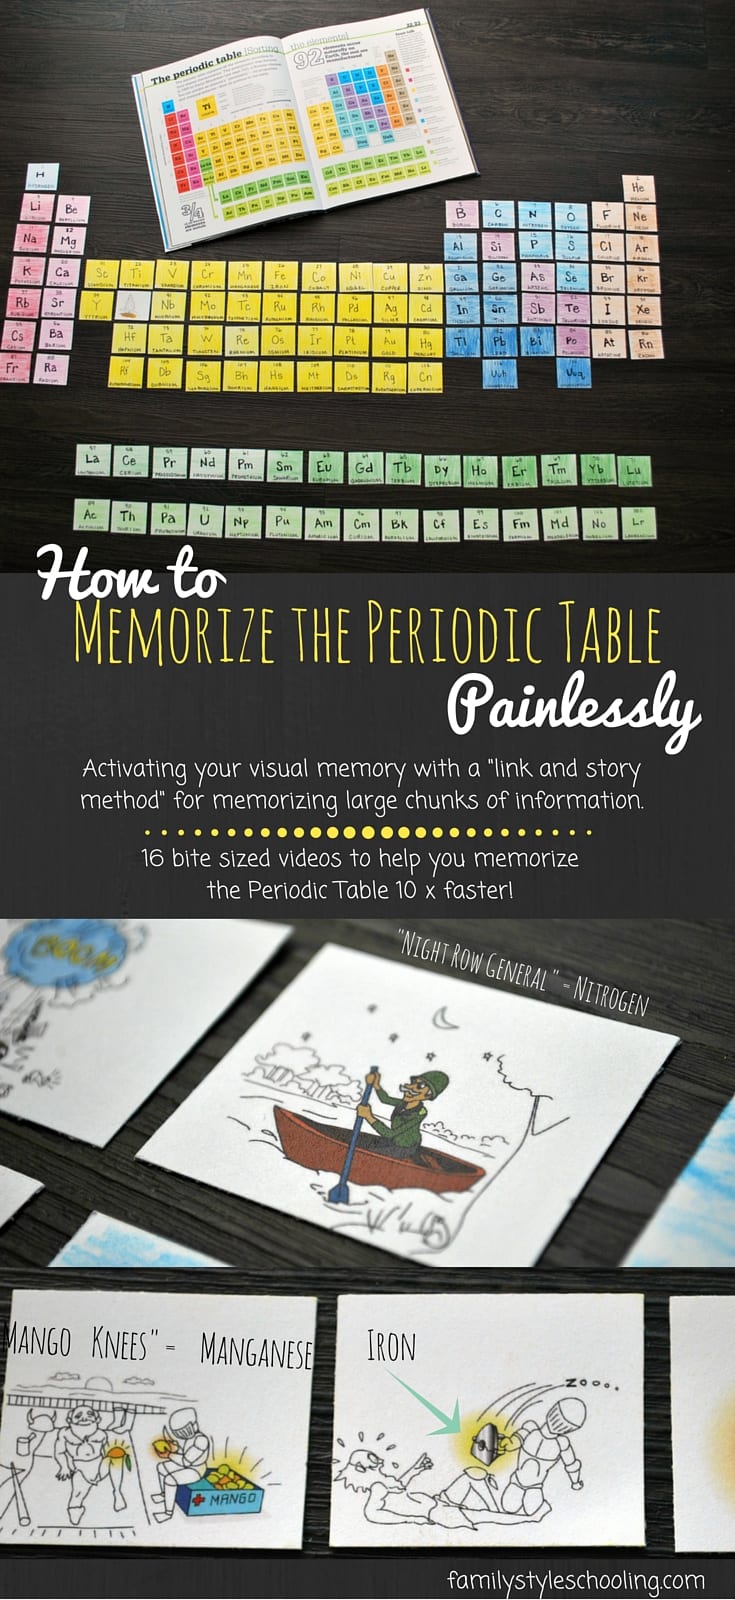 How to Memorize the Periodic Table Painlessly